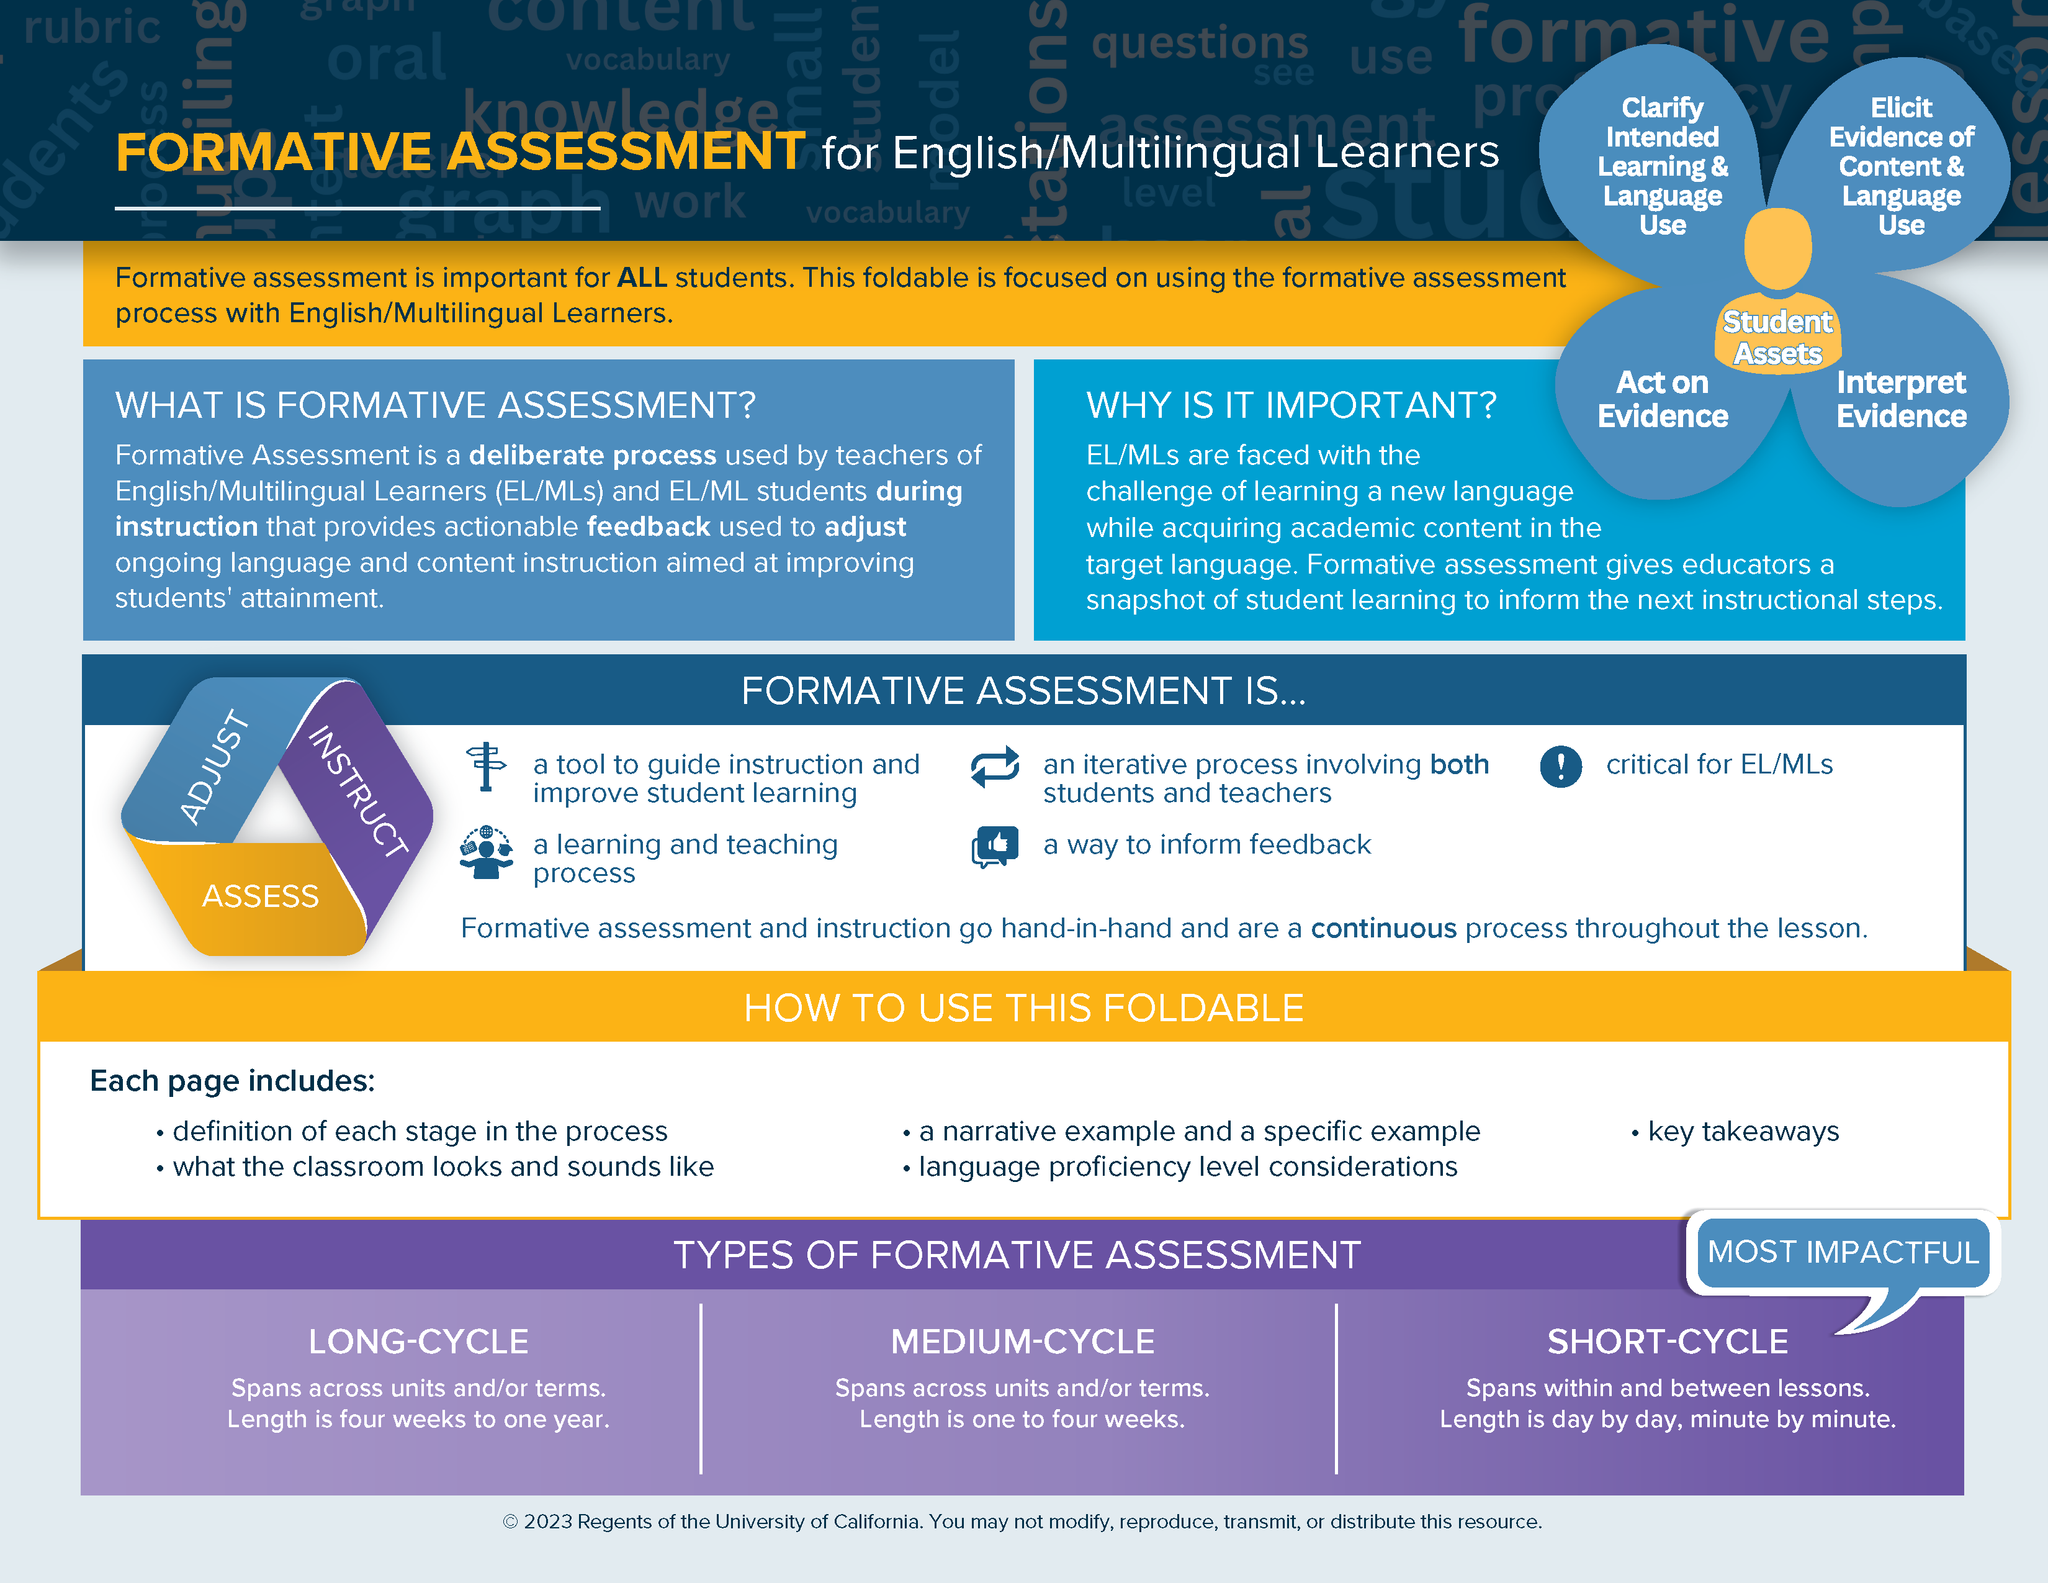 Teachers' Essential Guide to Formative Assessment